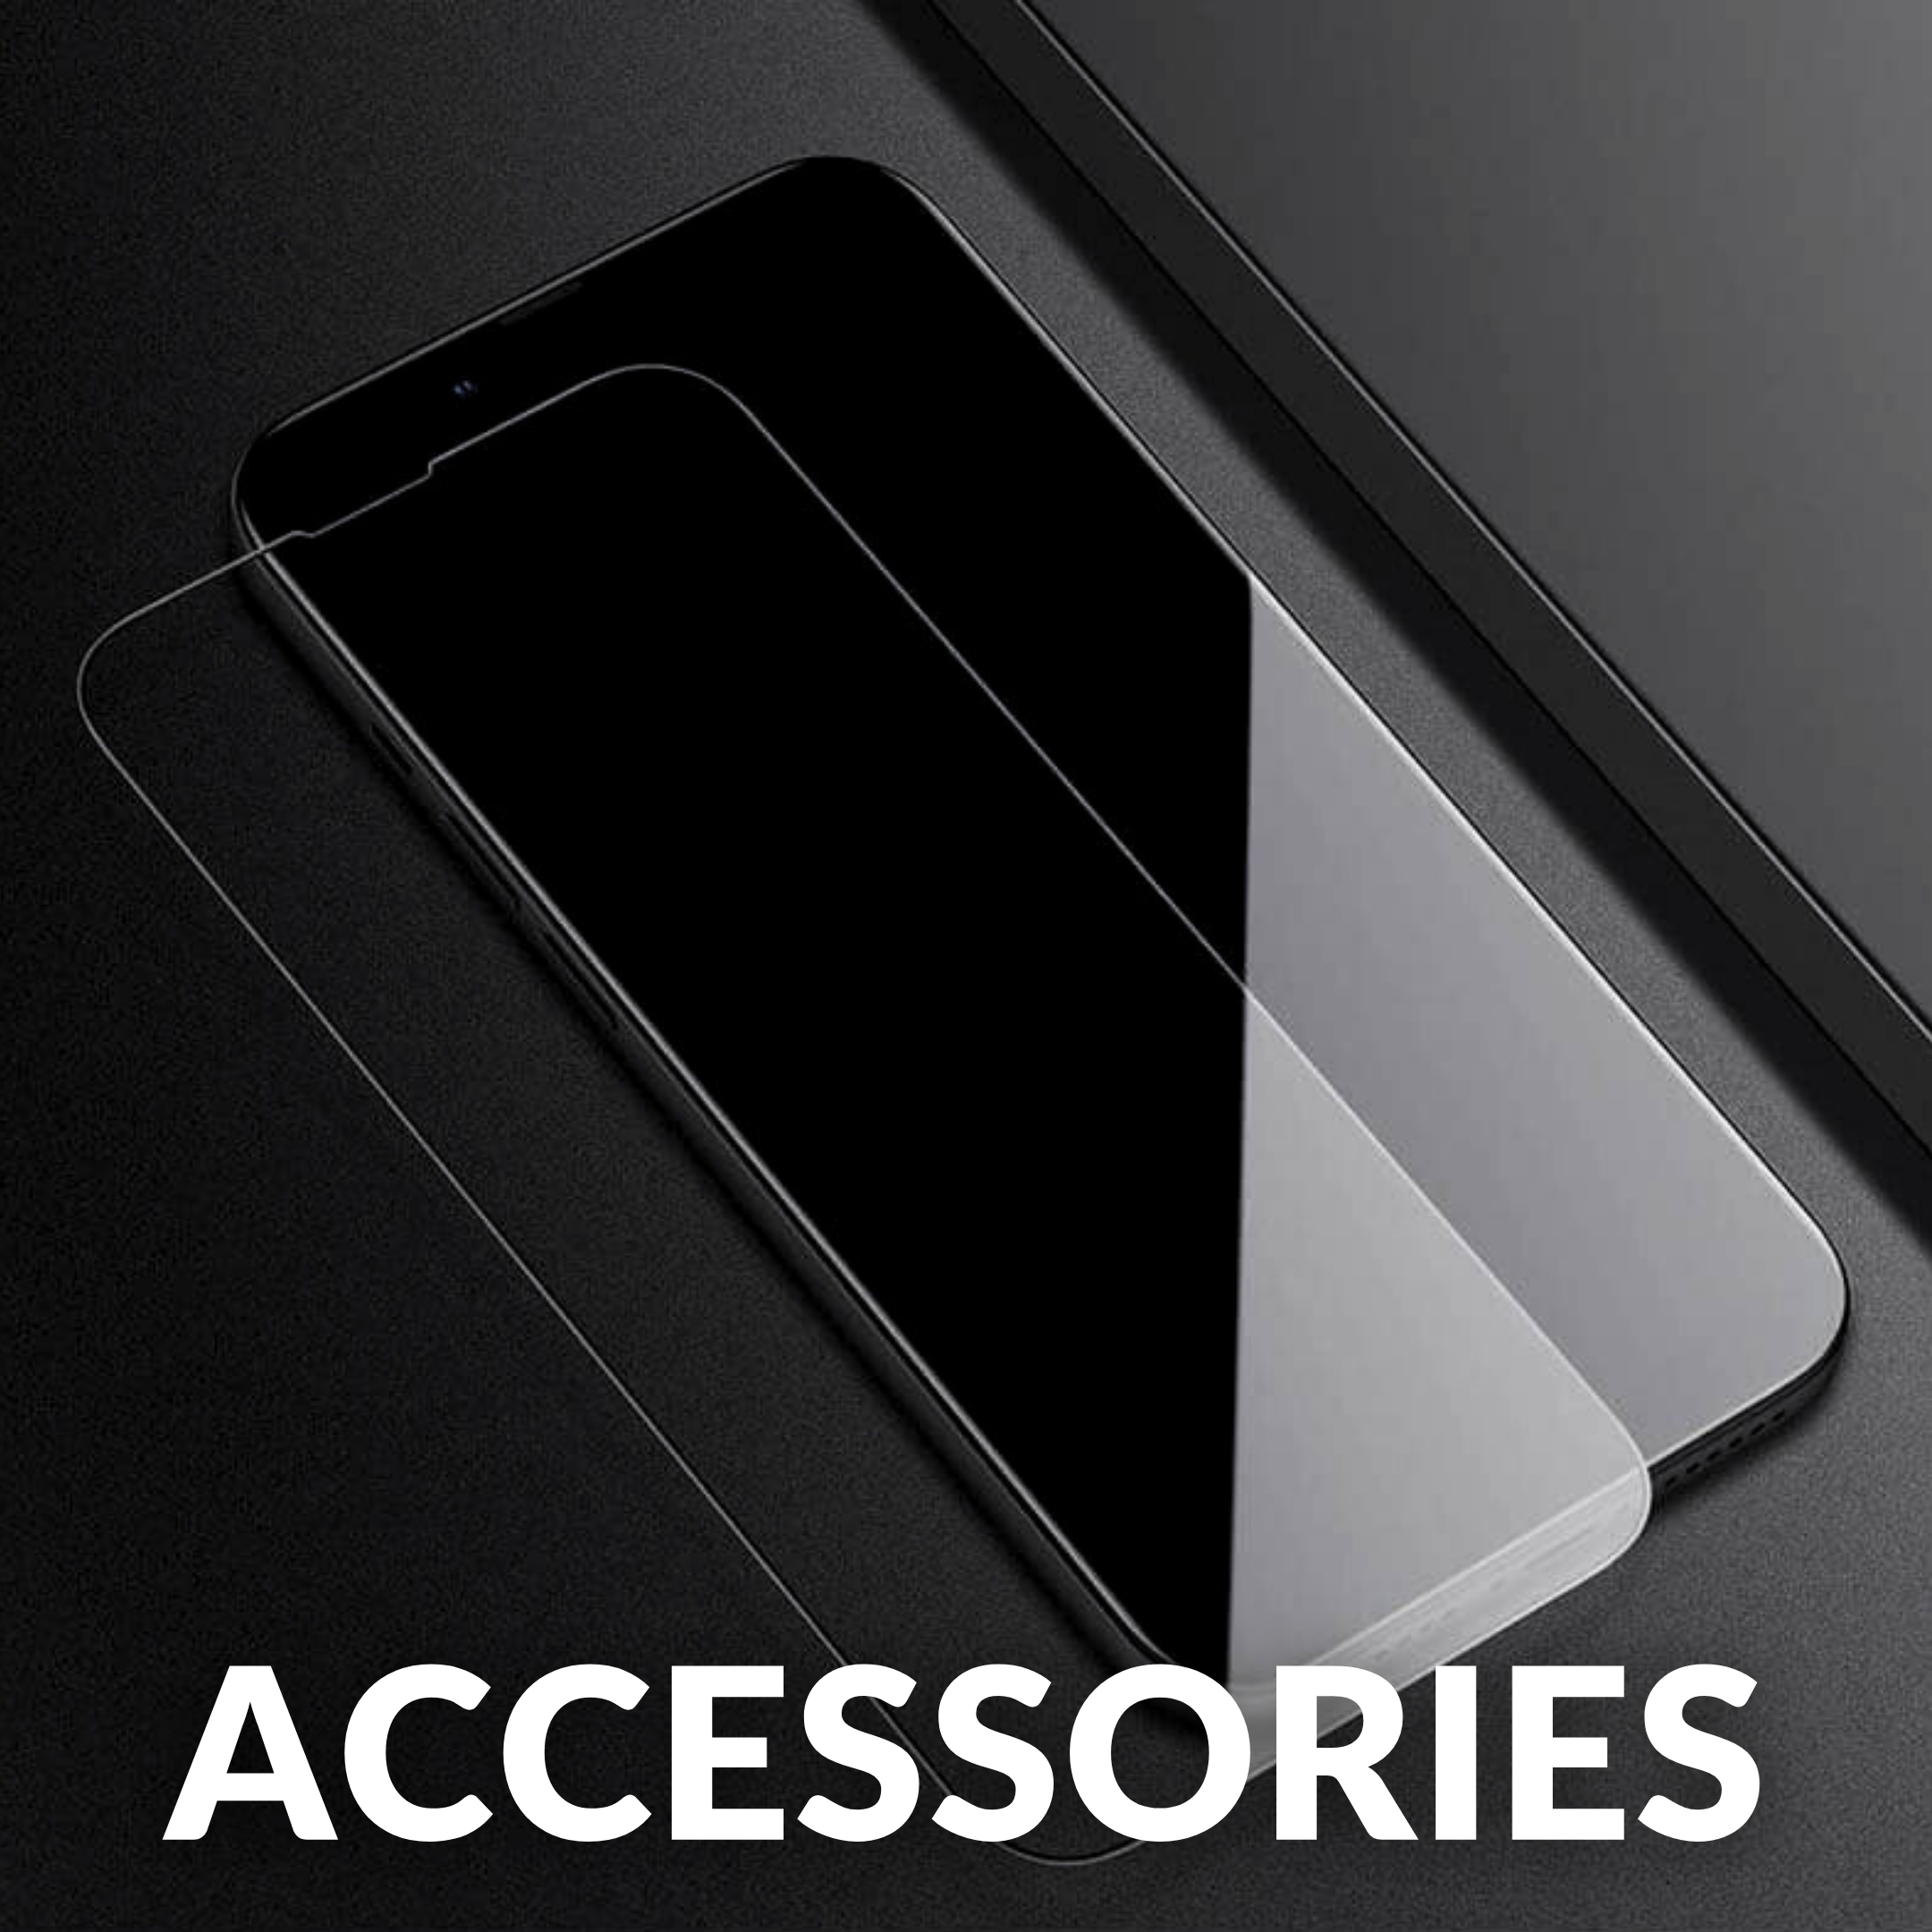 Phone Accessories, Tech Accessories, Screen Protector, AirTag Holder, FineWoven, AirTag Silicone Key Chain, Tempered Glass, Privacy Screen Protector, Anti-Blue Light Screen Protector